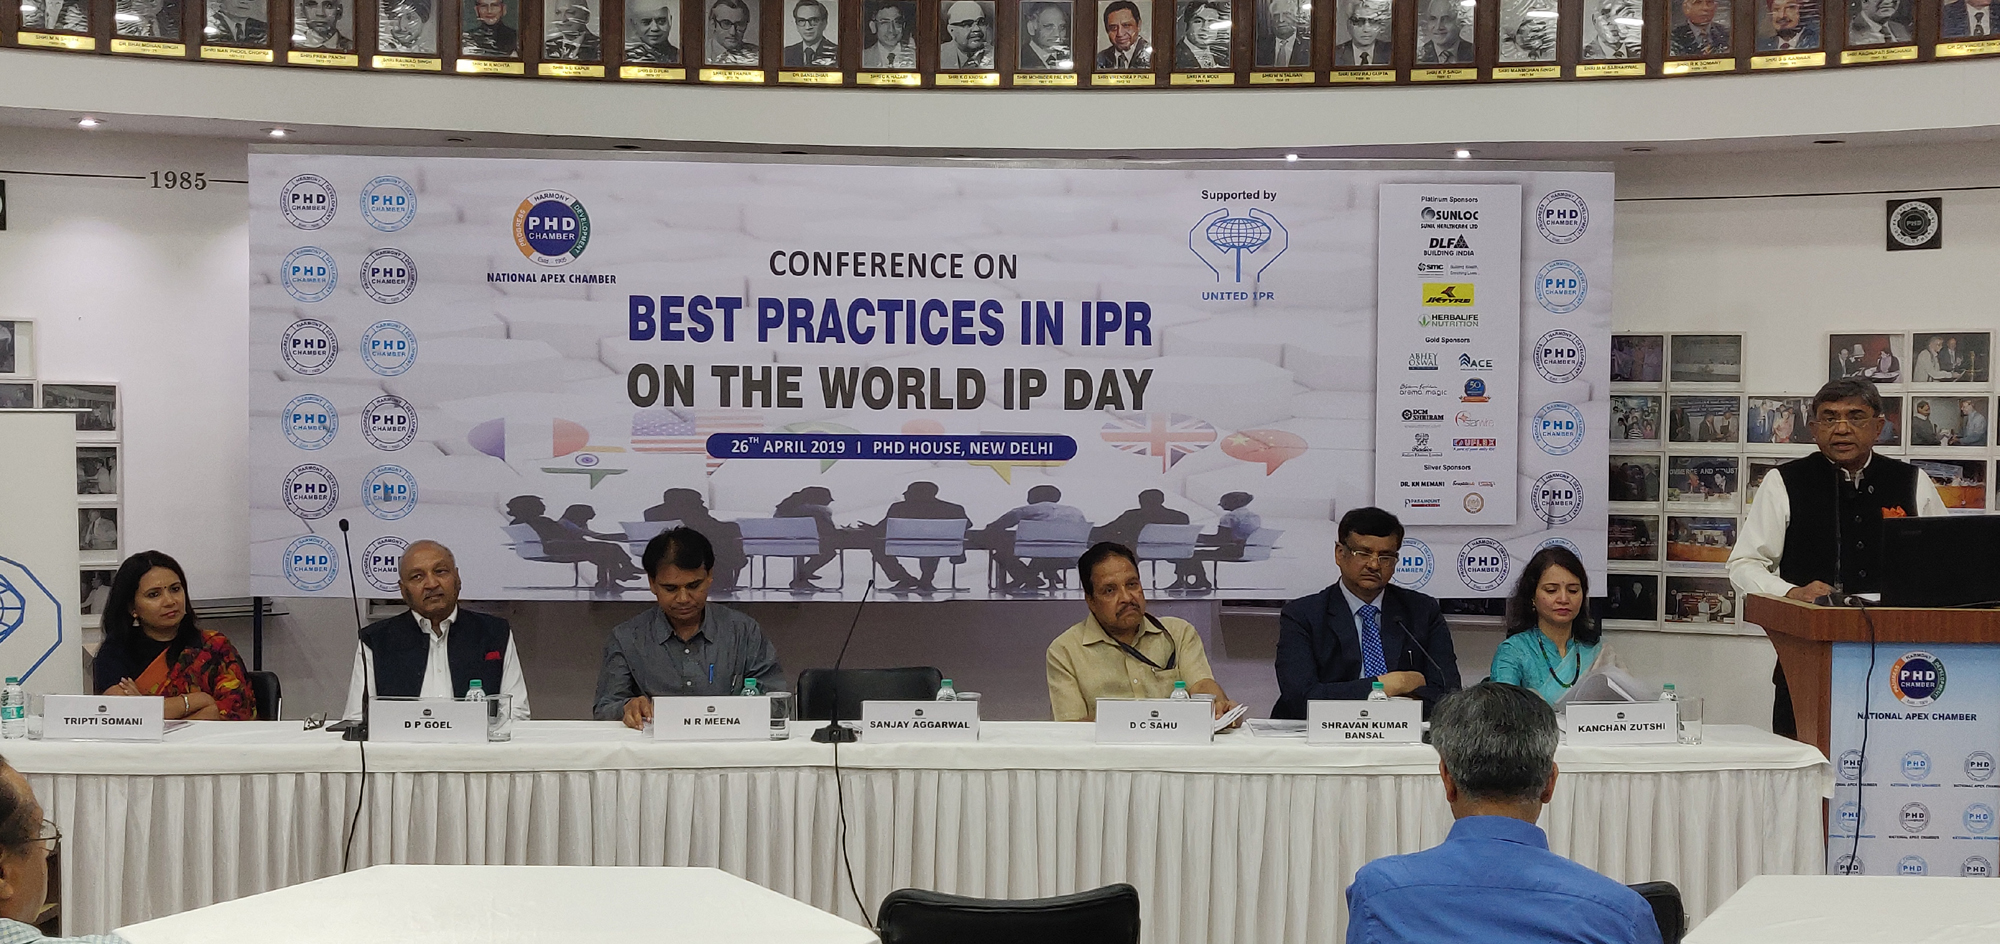 United IPR organizes conference on 'Best Practices in IPR' on World IP